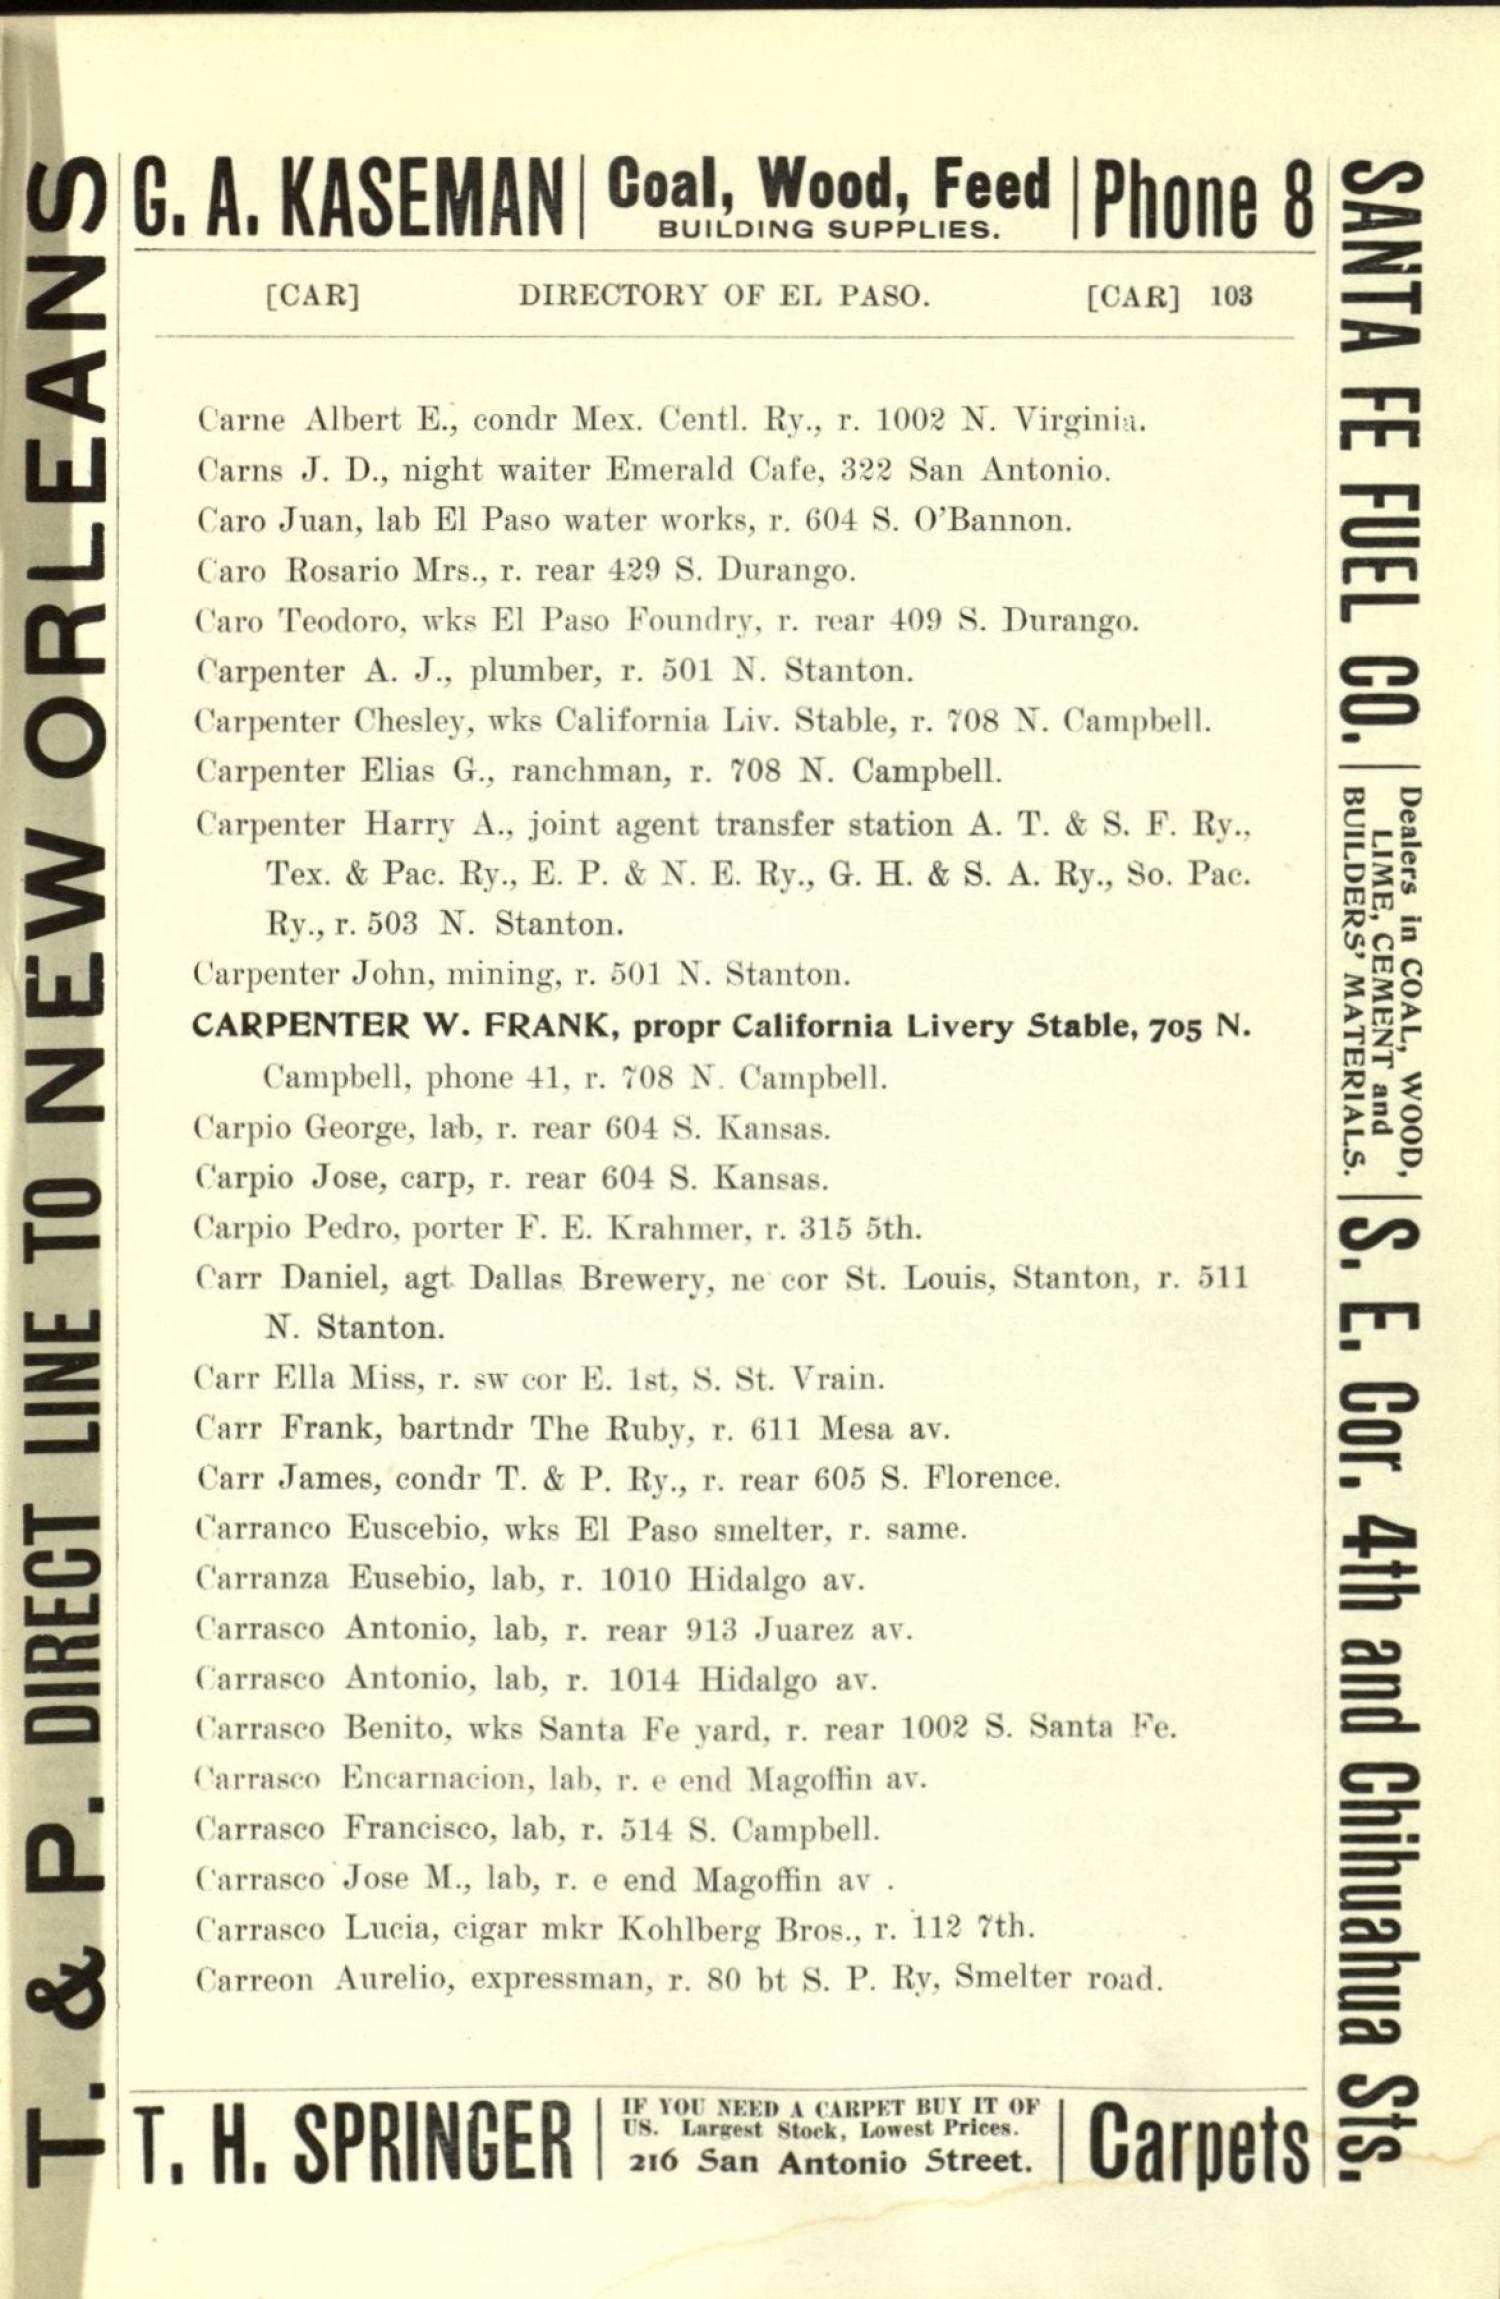 Worley's Directory of the City of El Paso, Texas 1901
                                                
                                                    103
                                                